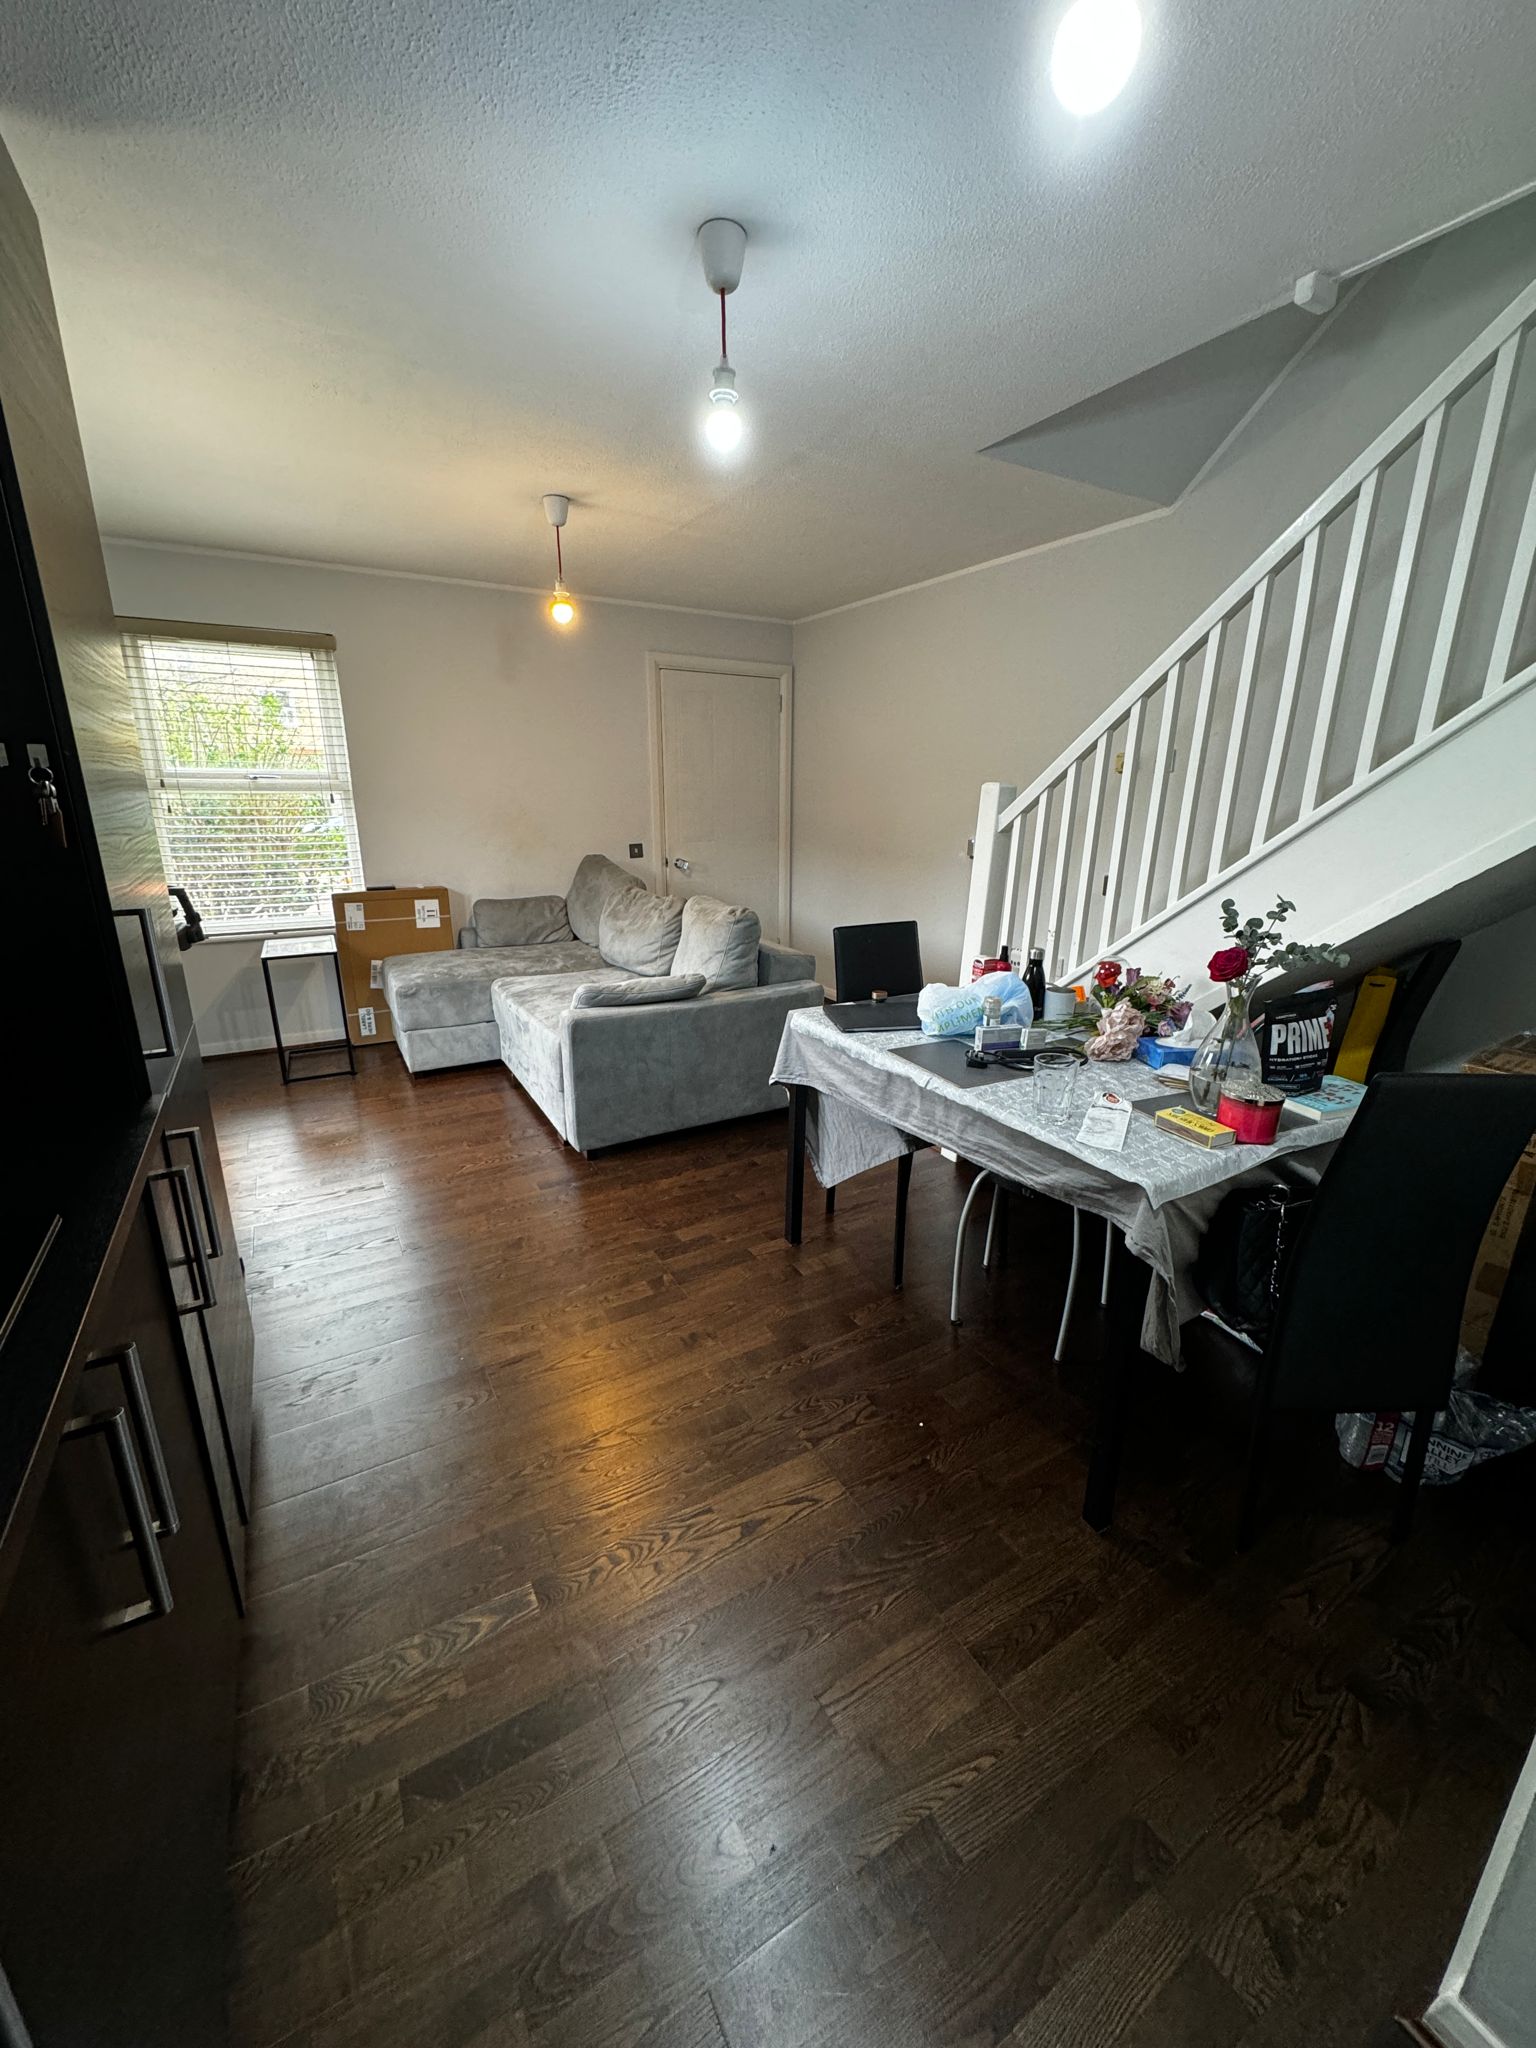 1 bed Semi-Detached House for rent in East Ham. From PropertyLoop